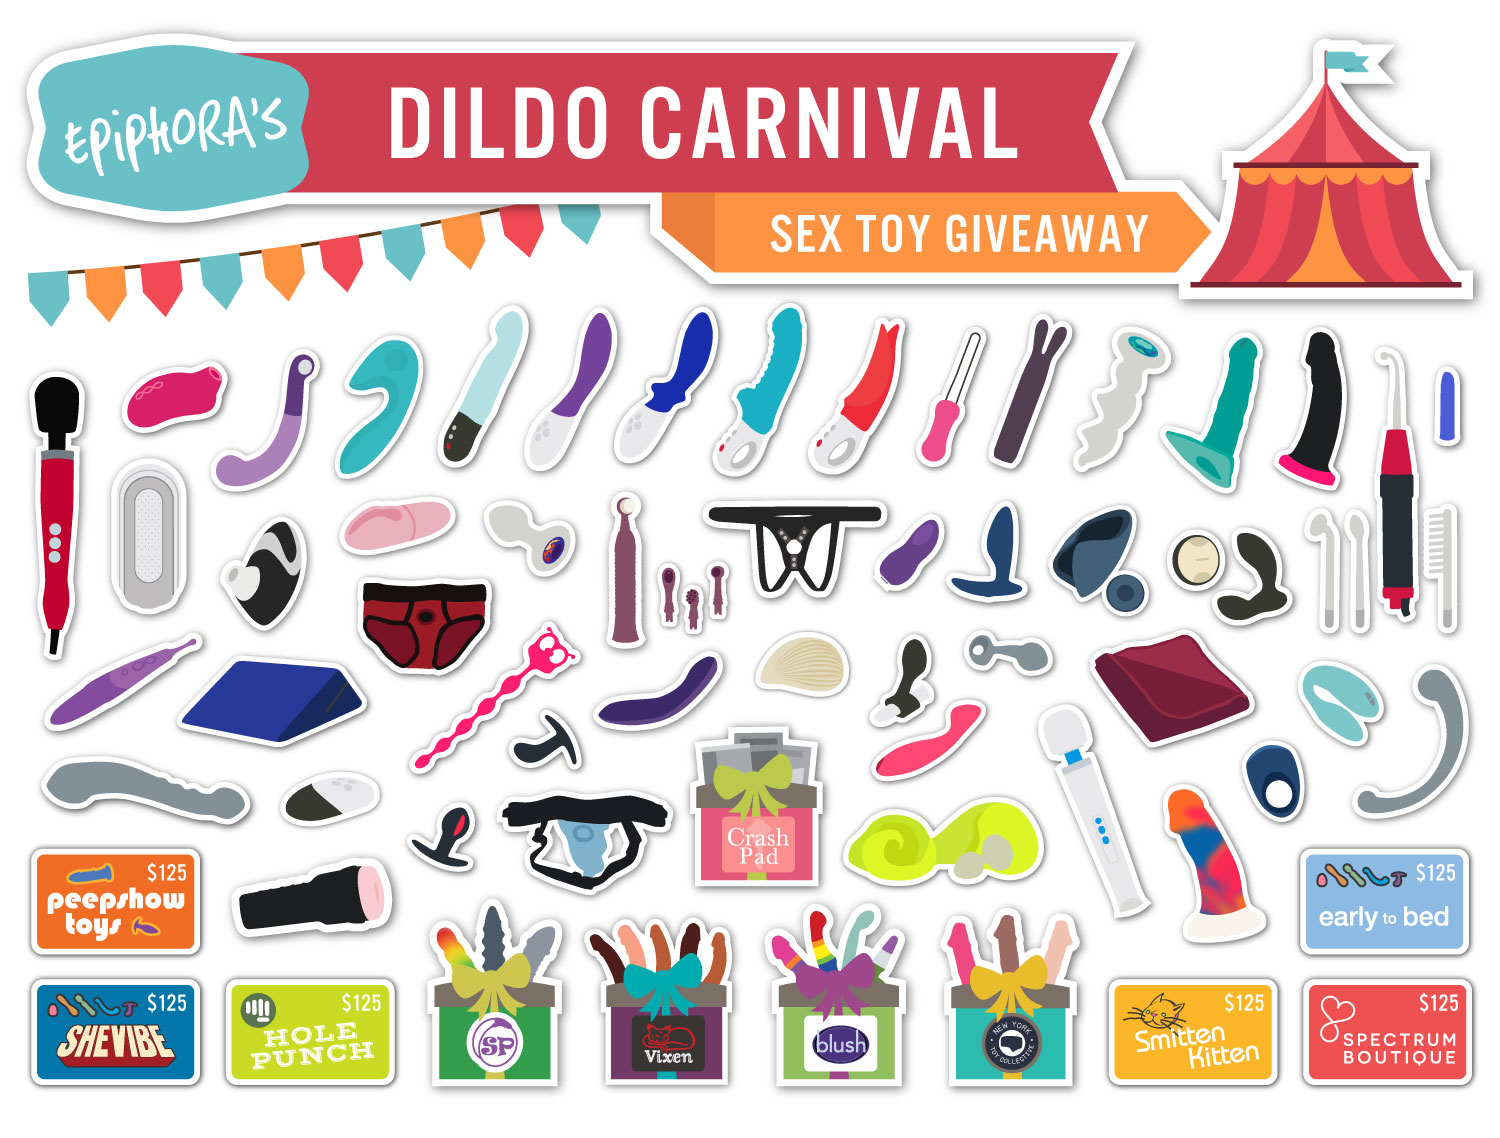 Dildo carnival a HUGE sex toy giveaway! » Hey Epiphora image